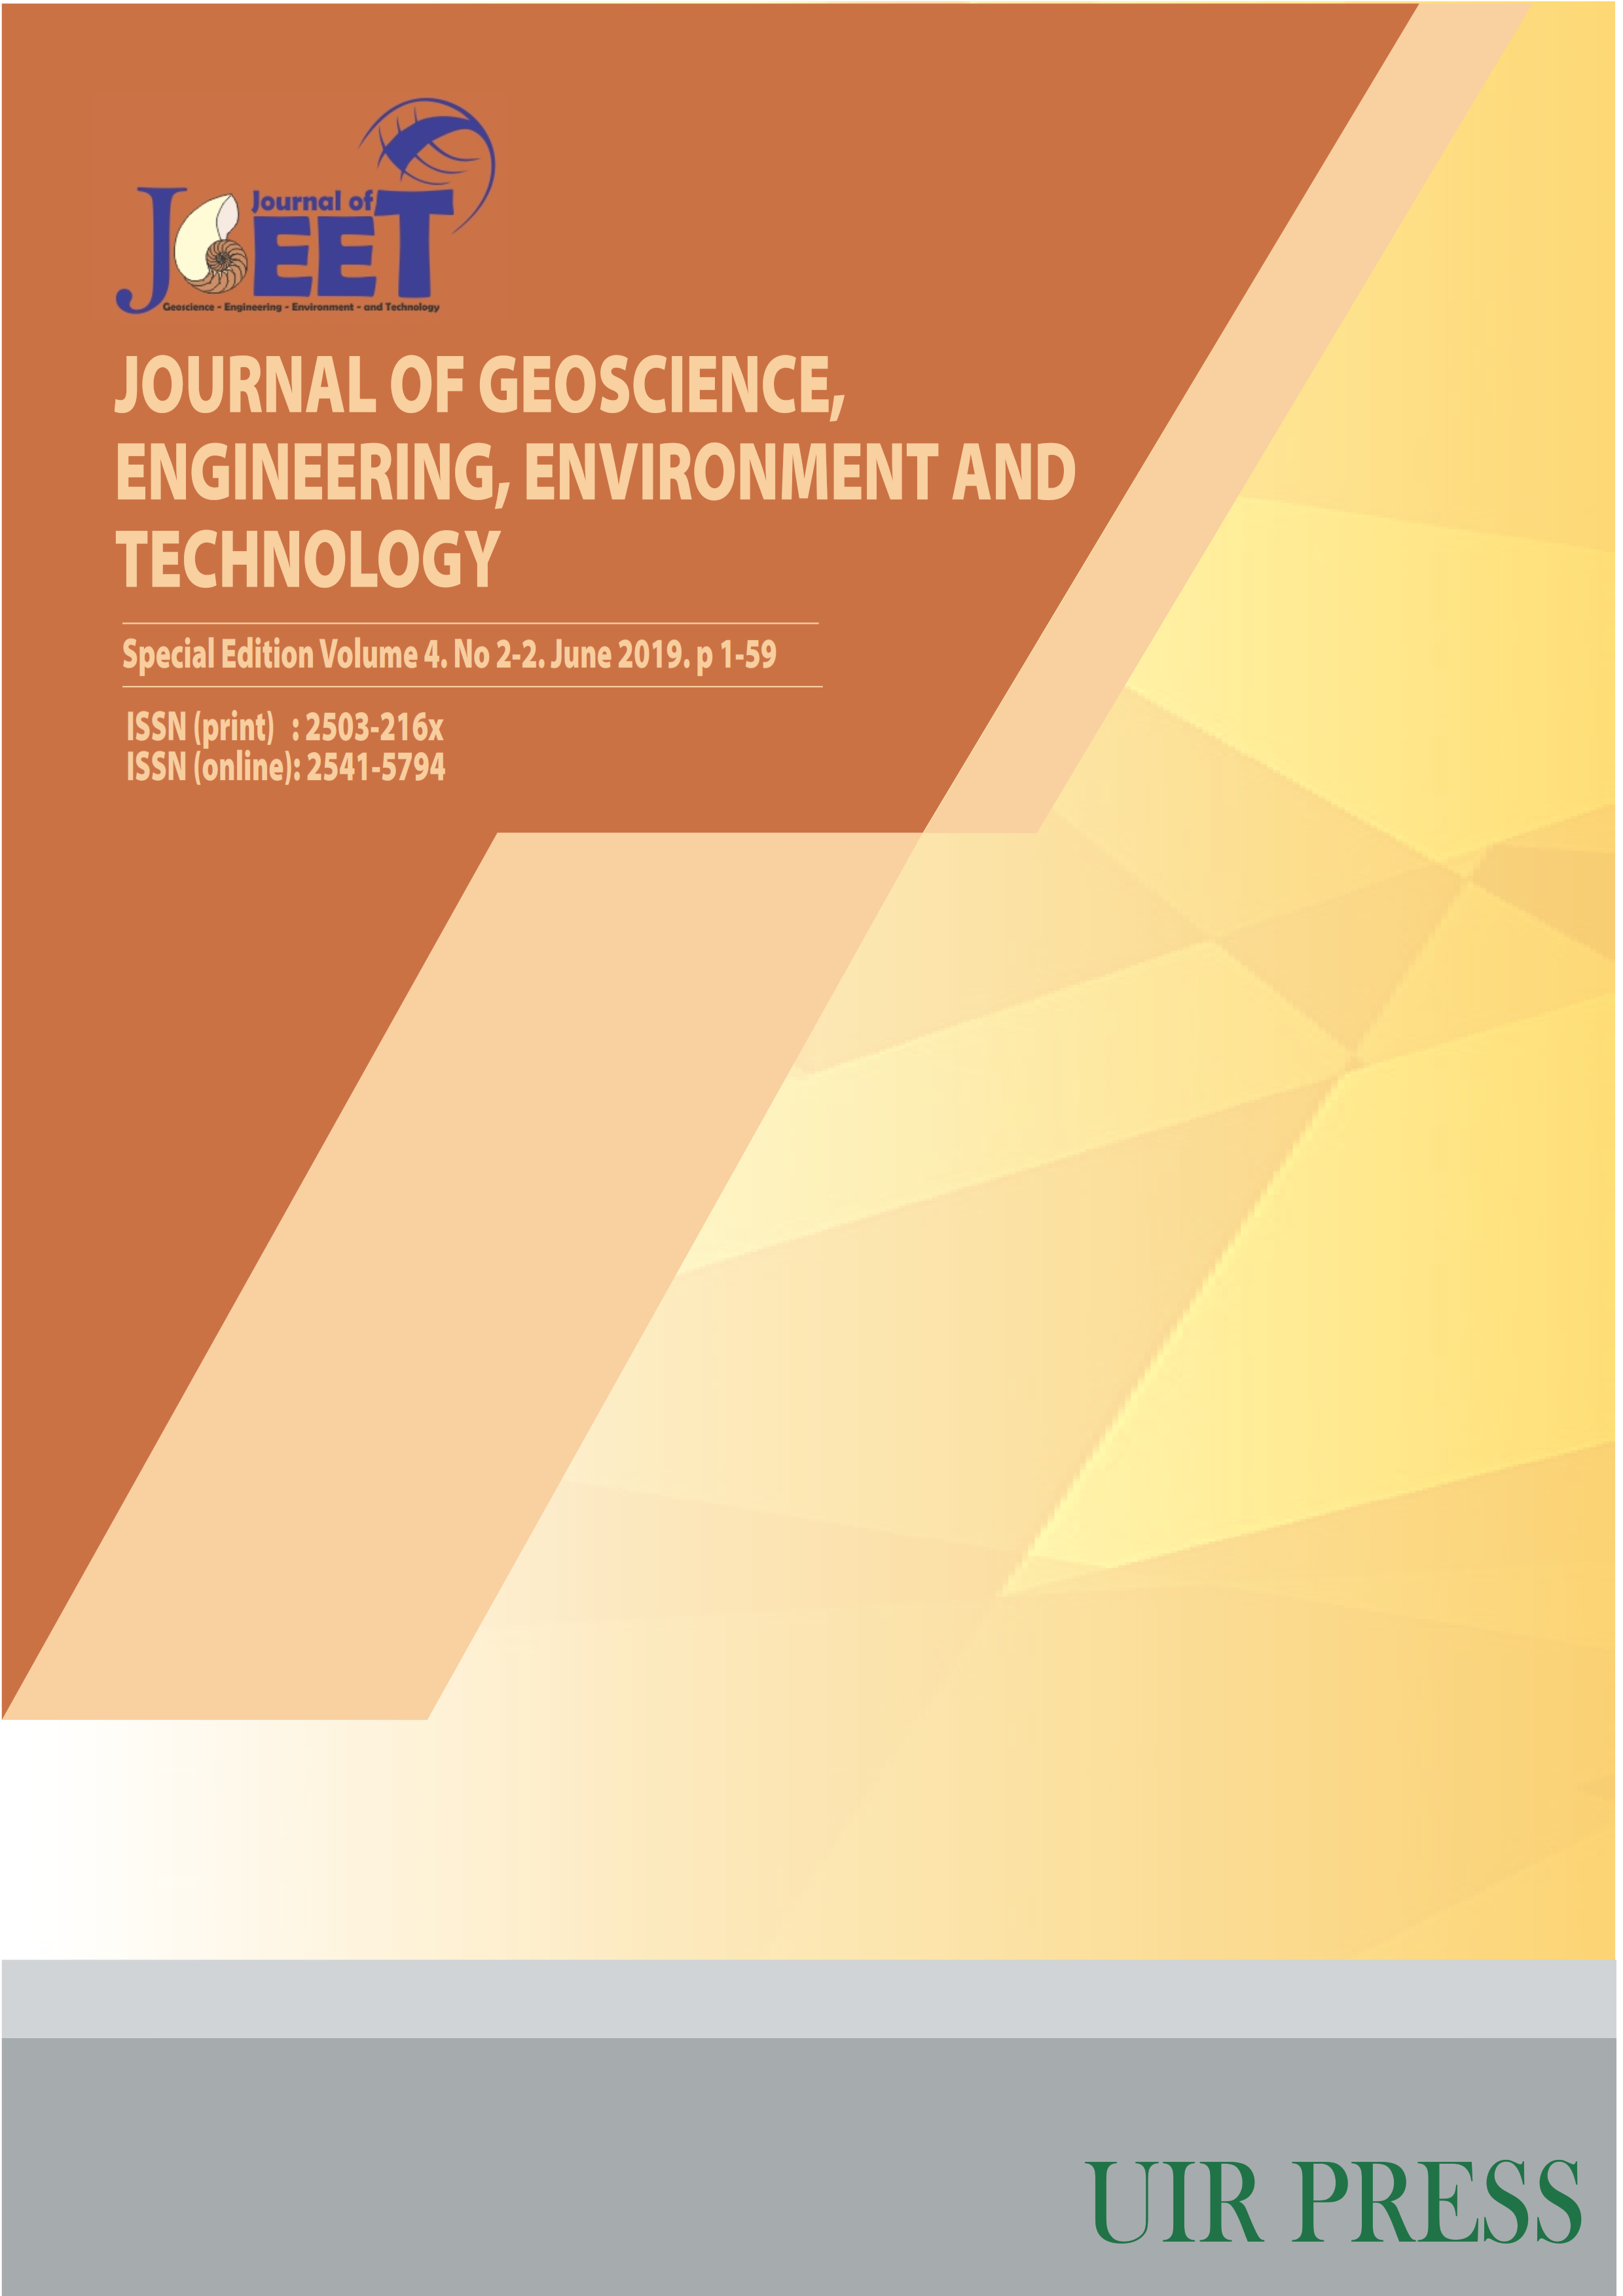 					View Vol. 4 No. 2-2 (2019): Special Edition (Geology, Geomorphology and Tectonics of India)
				